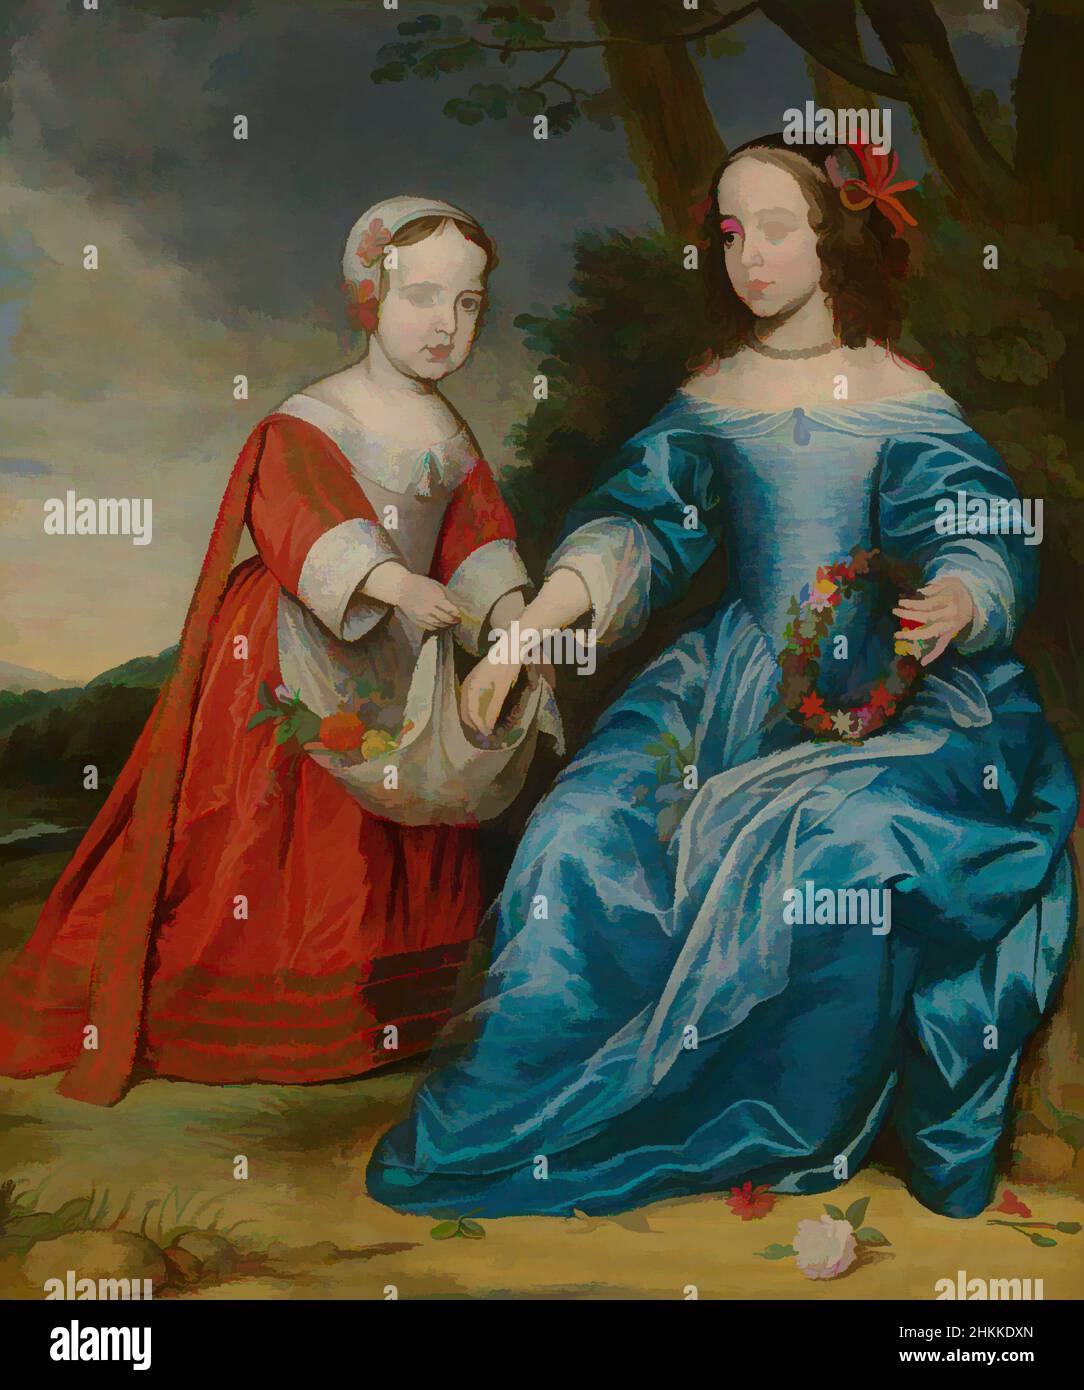 Art inspired by Double portrait of Prince Willem III 1650-1702 and his aunt Maria, princess of Orange 1642-1688, as children, Gerrit van Honthorst, 1653, Classic works modernized by Artotop with a splash of modernity. Shapes, color and value, eye-catching visual impact on art. Emotions through freedom of artworks in a contemporary way. A timeless message pursuing a wildly creative new direction. Artists turning to the digital medium and creating the Artotop NFT Stock Photo